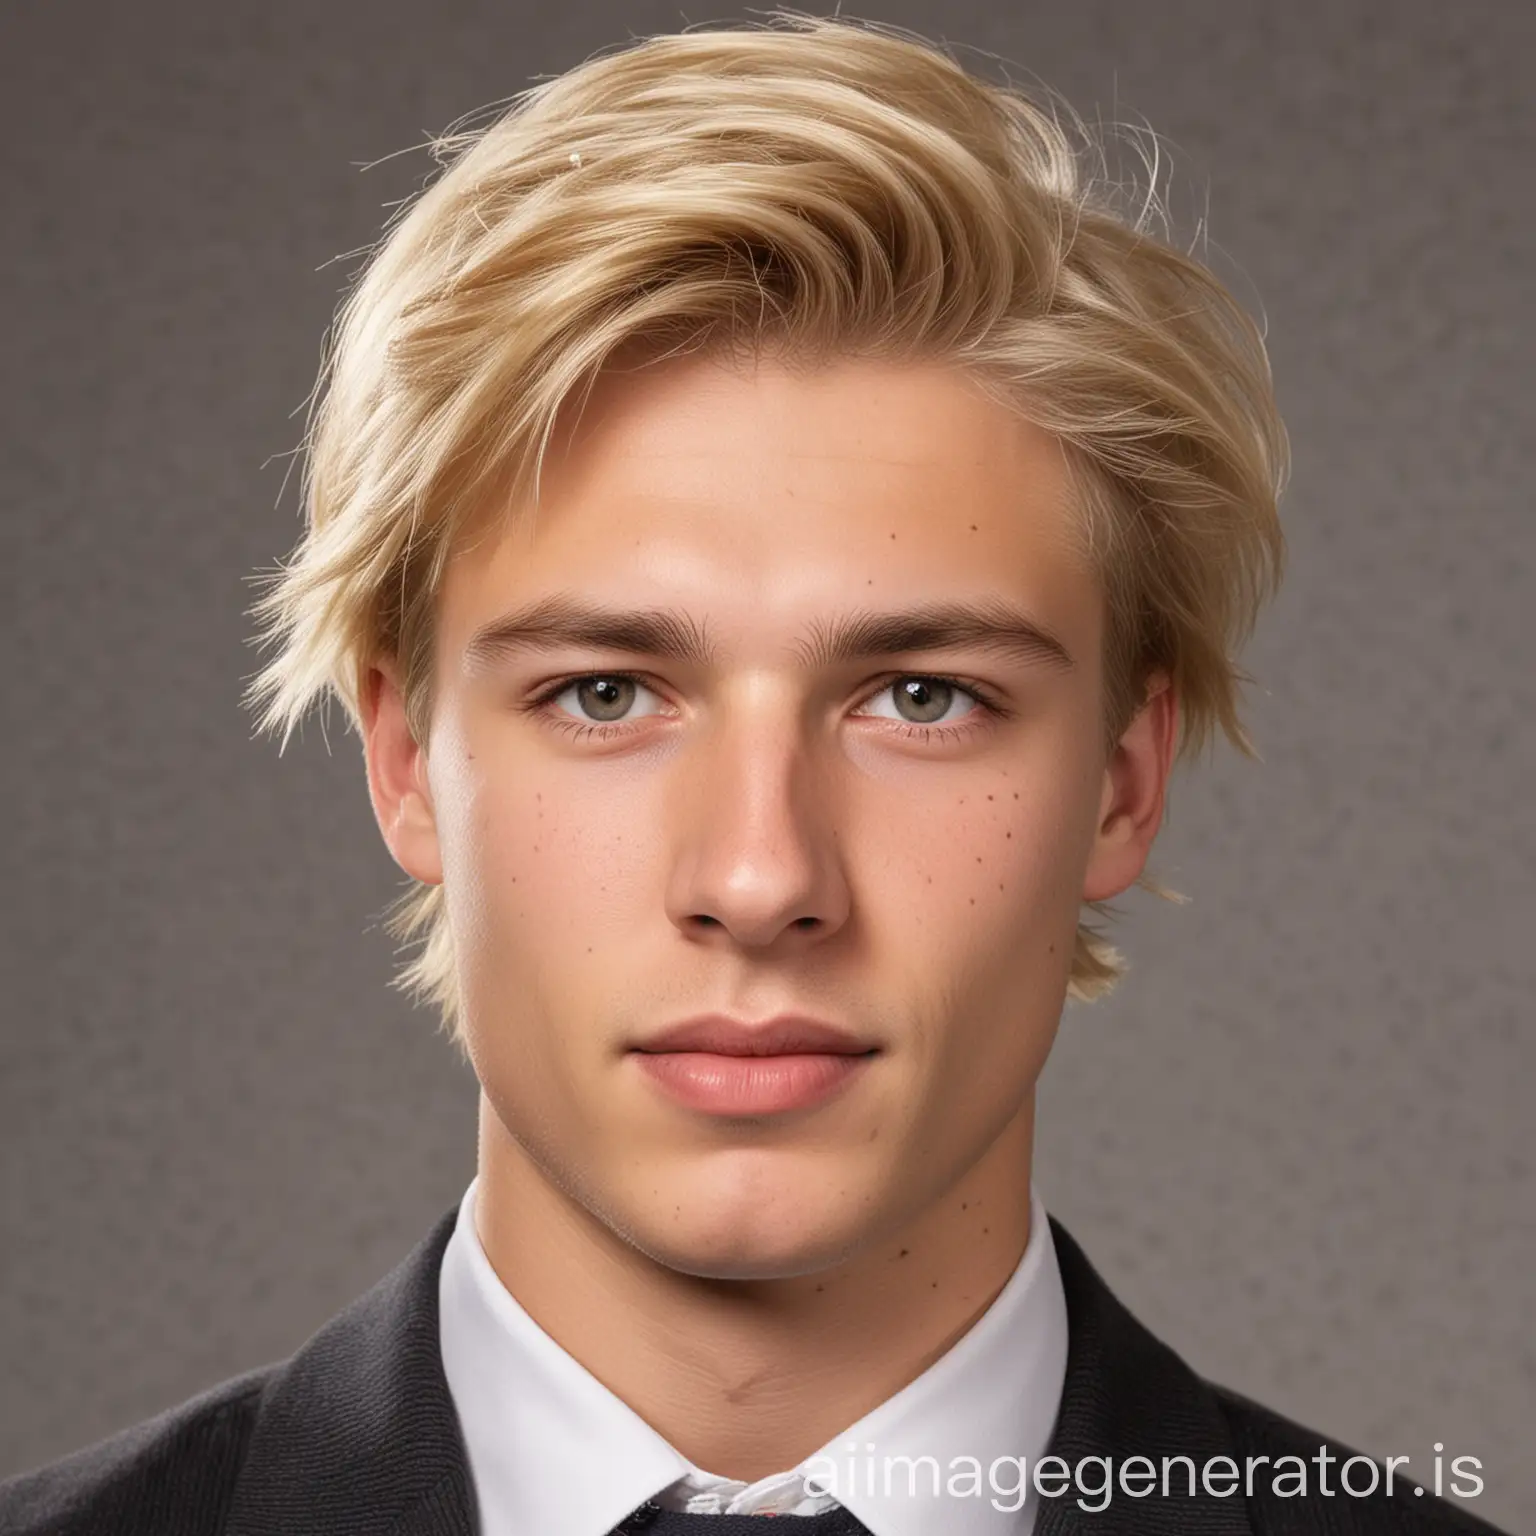 Ambitious-Dutch-Male-Student-with-Blond-Hair